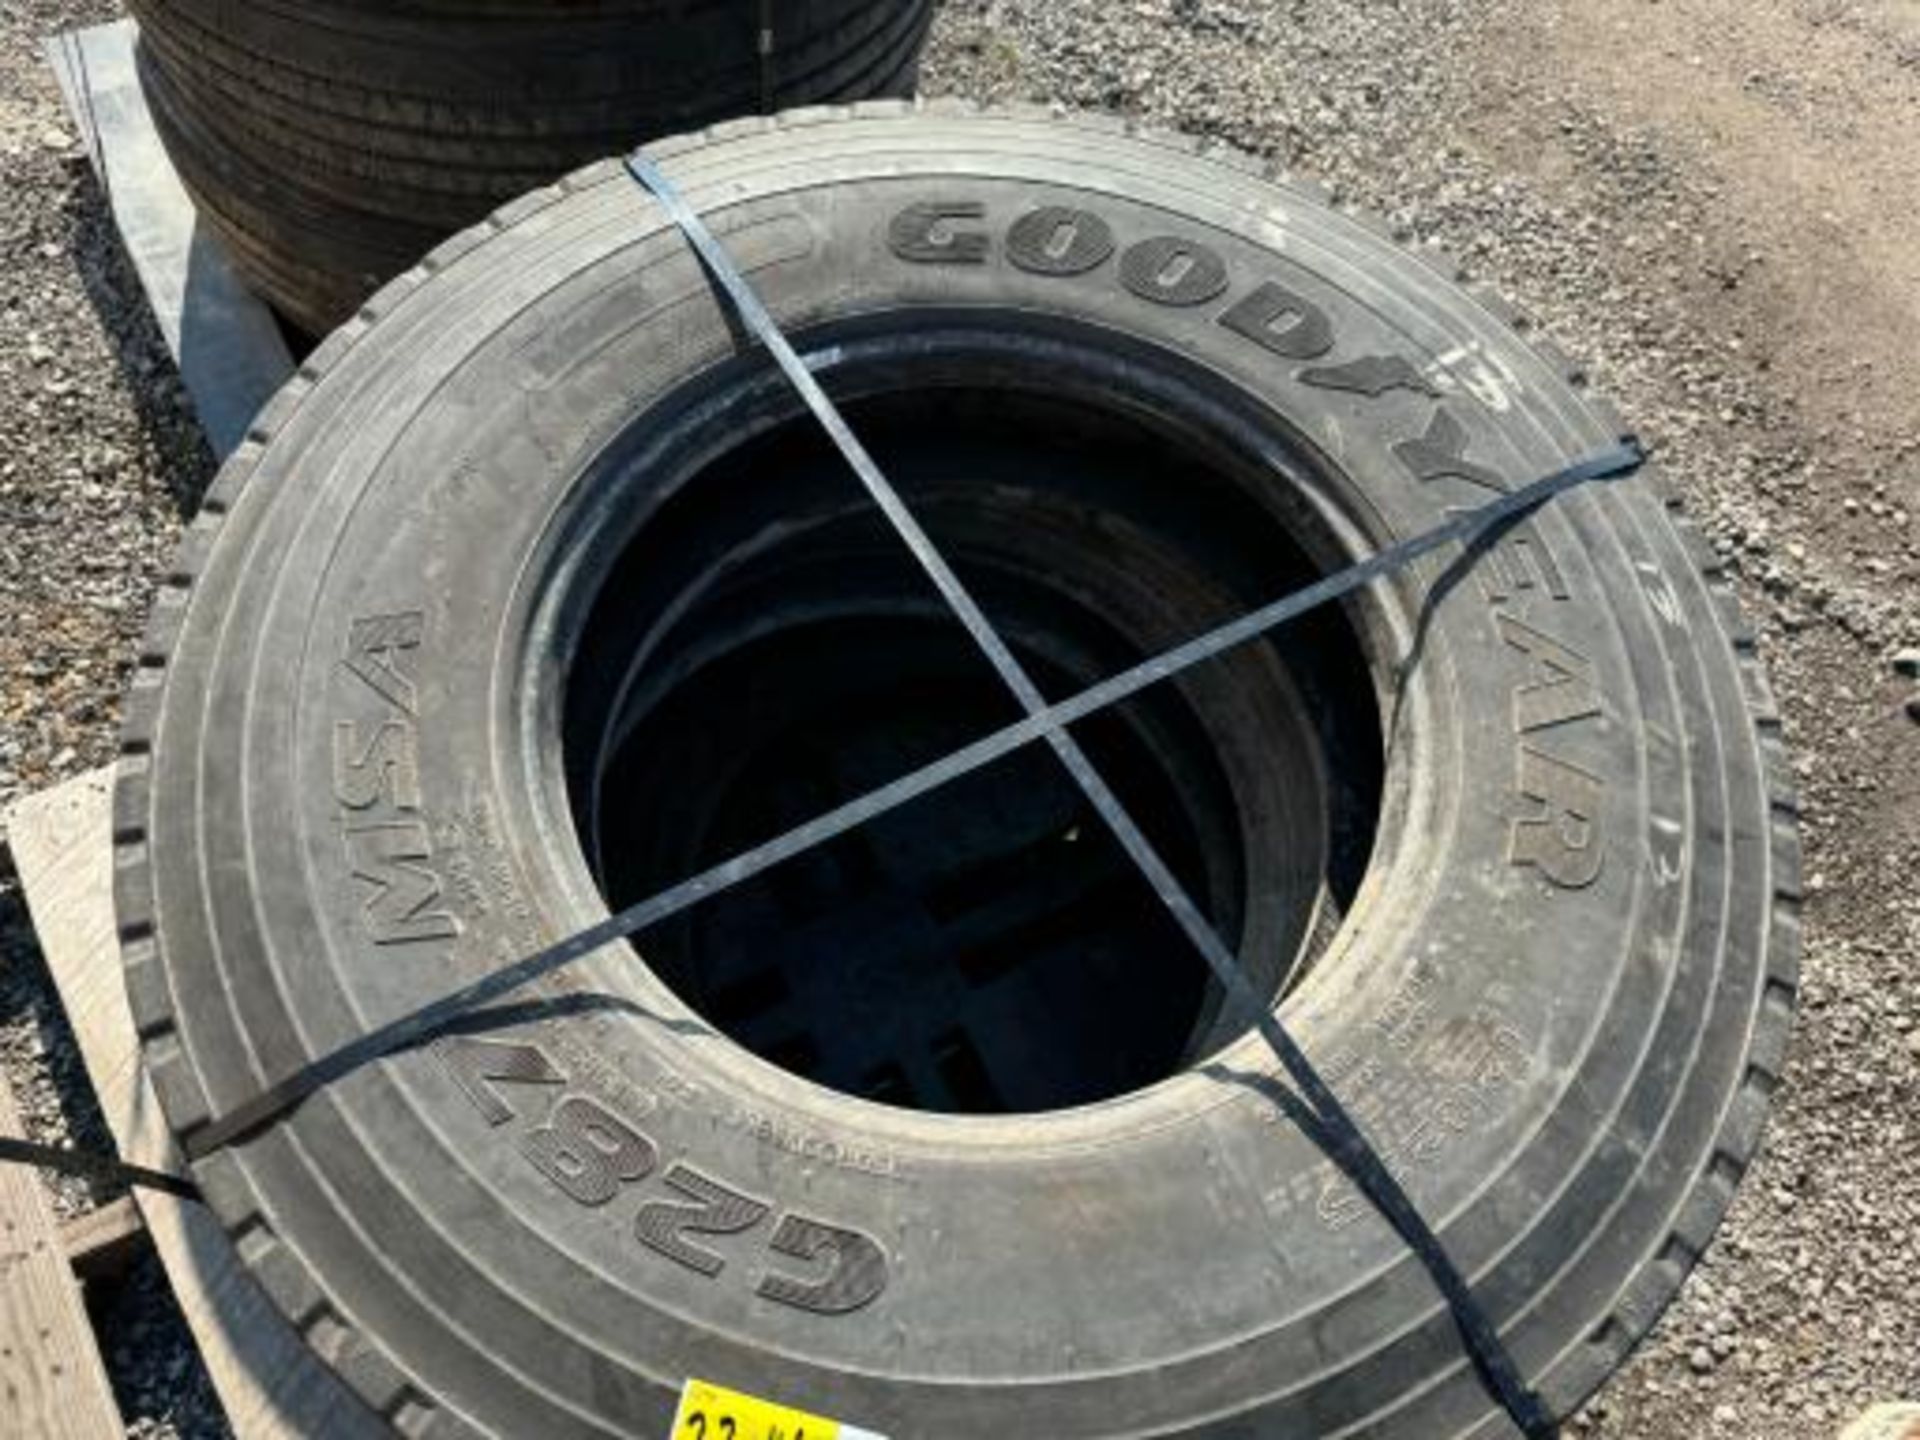 3 Goodyear G287 MSA 12R 22.5 Tires - Image 2 of 3